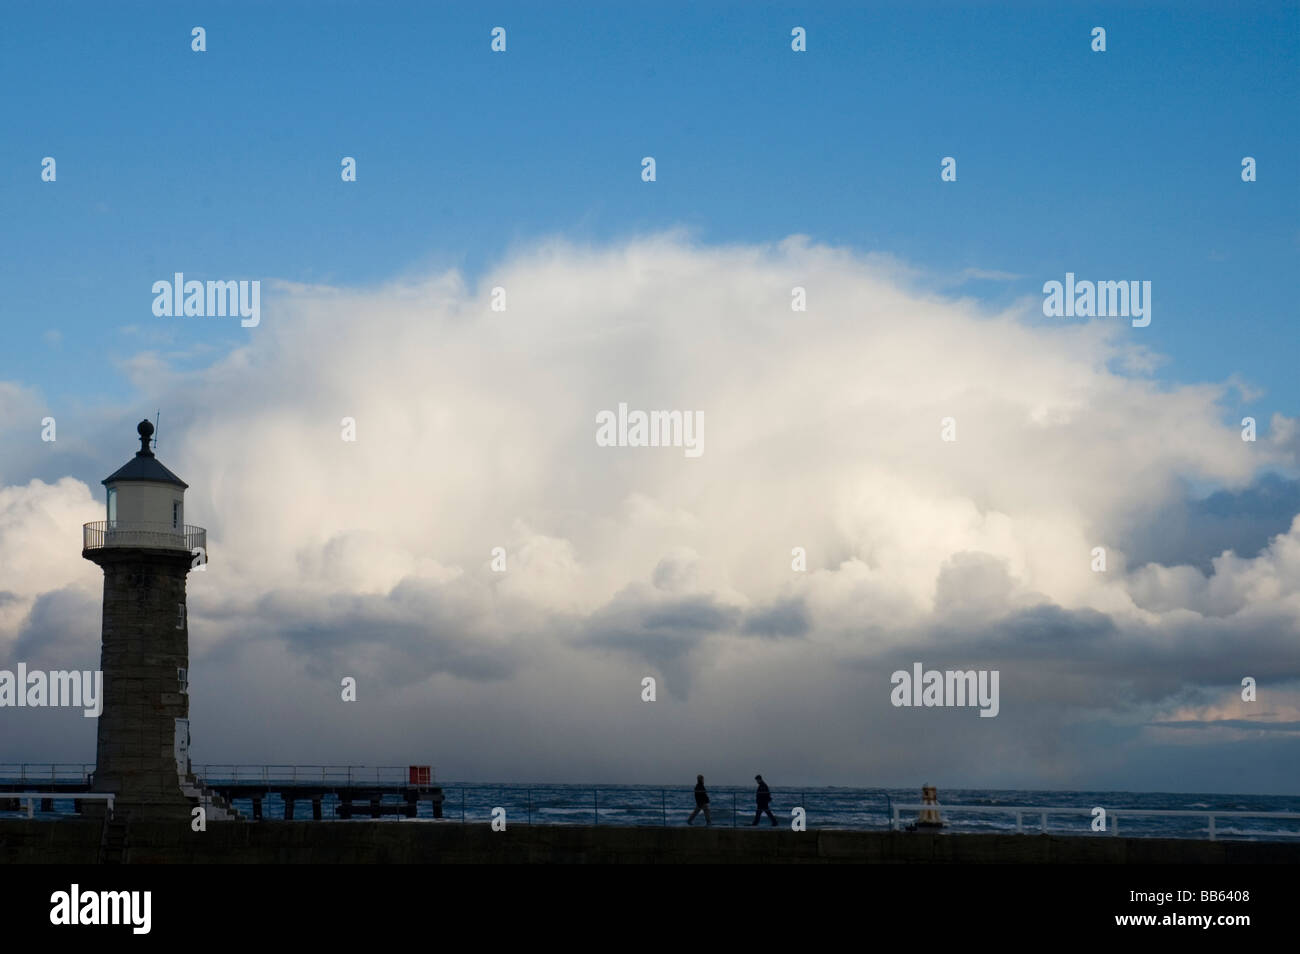 Winter storm approaches Whitby harbour with a lighthouse in the foreground Stock Photo